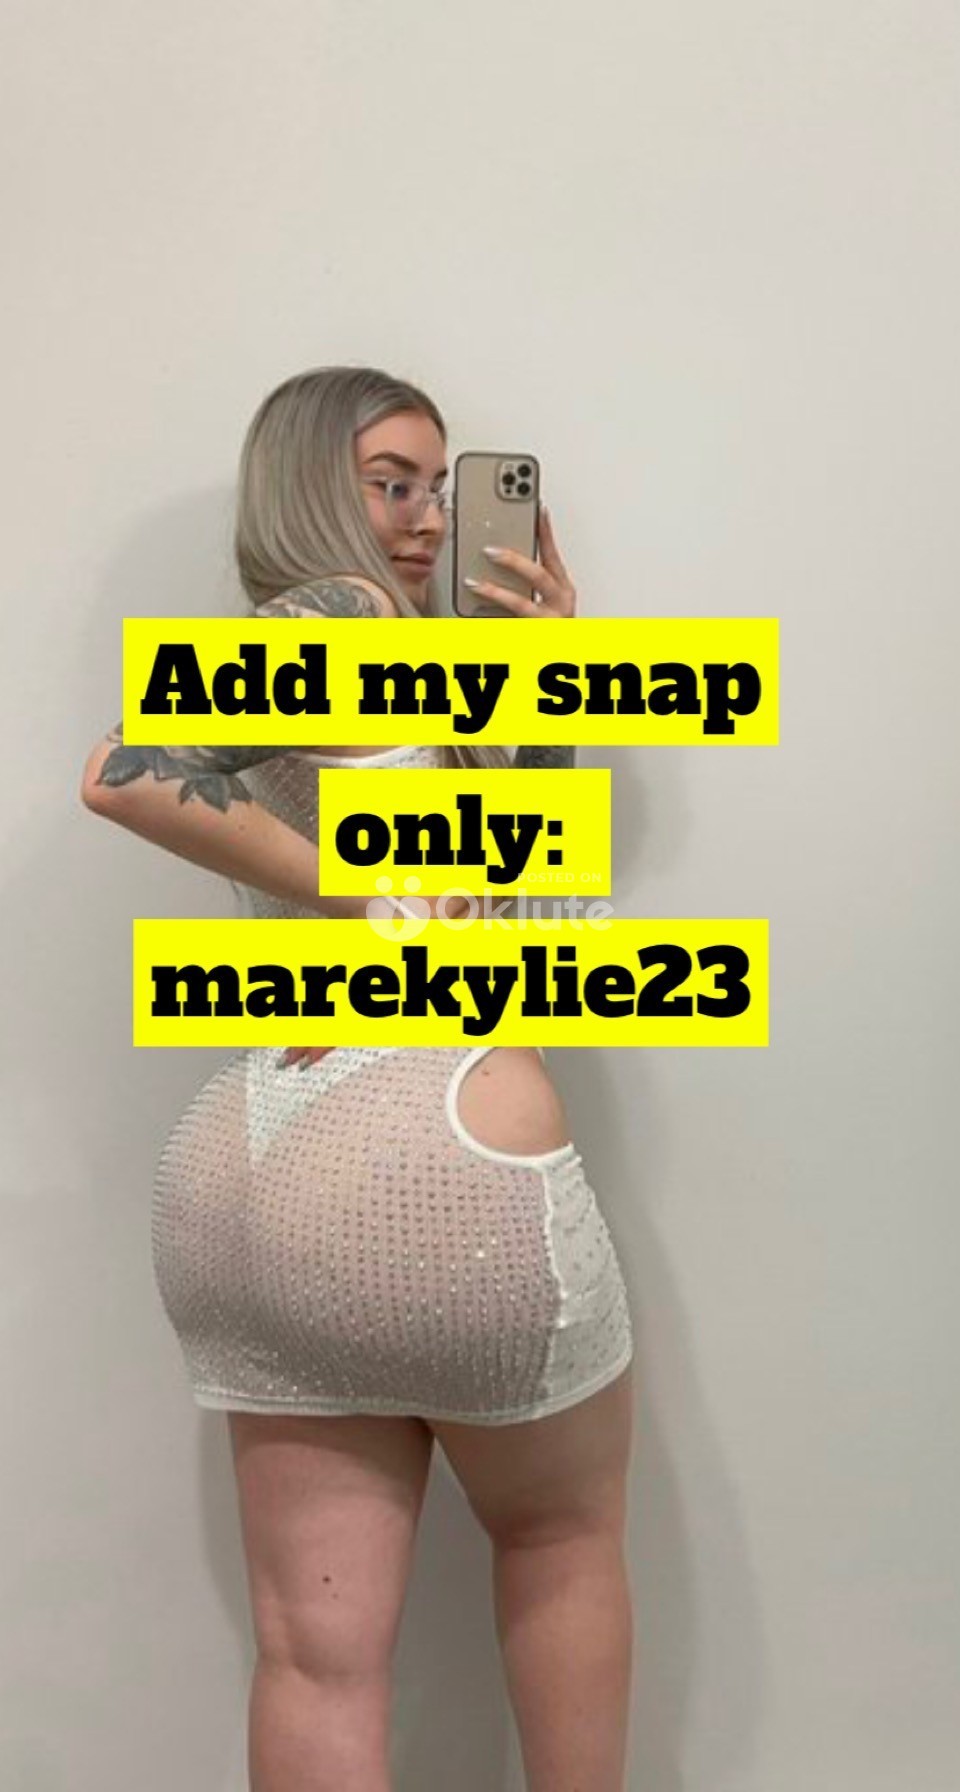 Add my snap only Im an insatiably horny with a talent for sharing sensational climaxes with cocks and clits